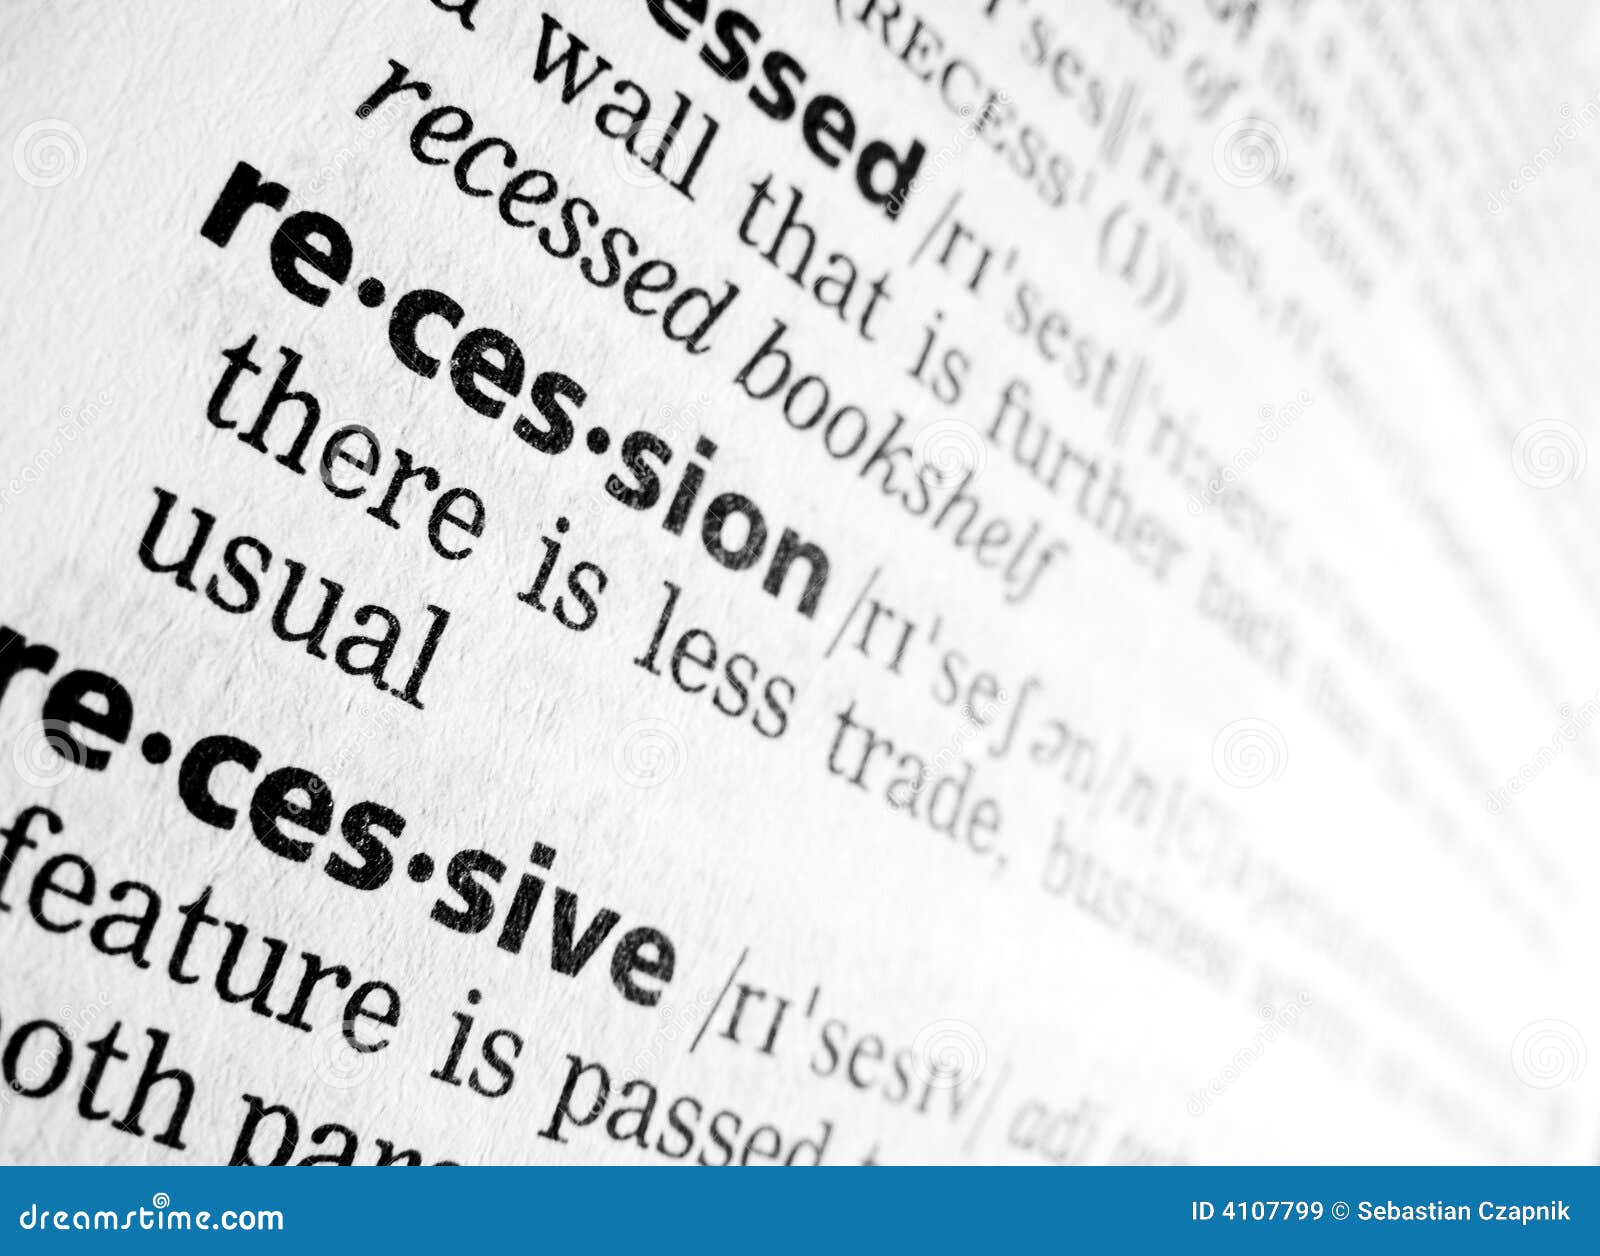 recession in dictionary